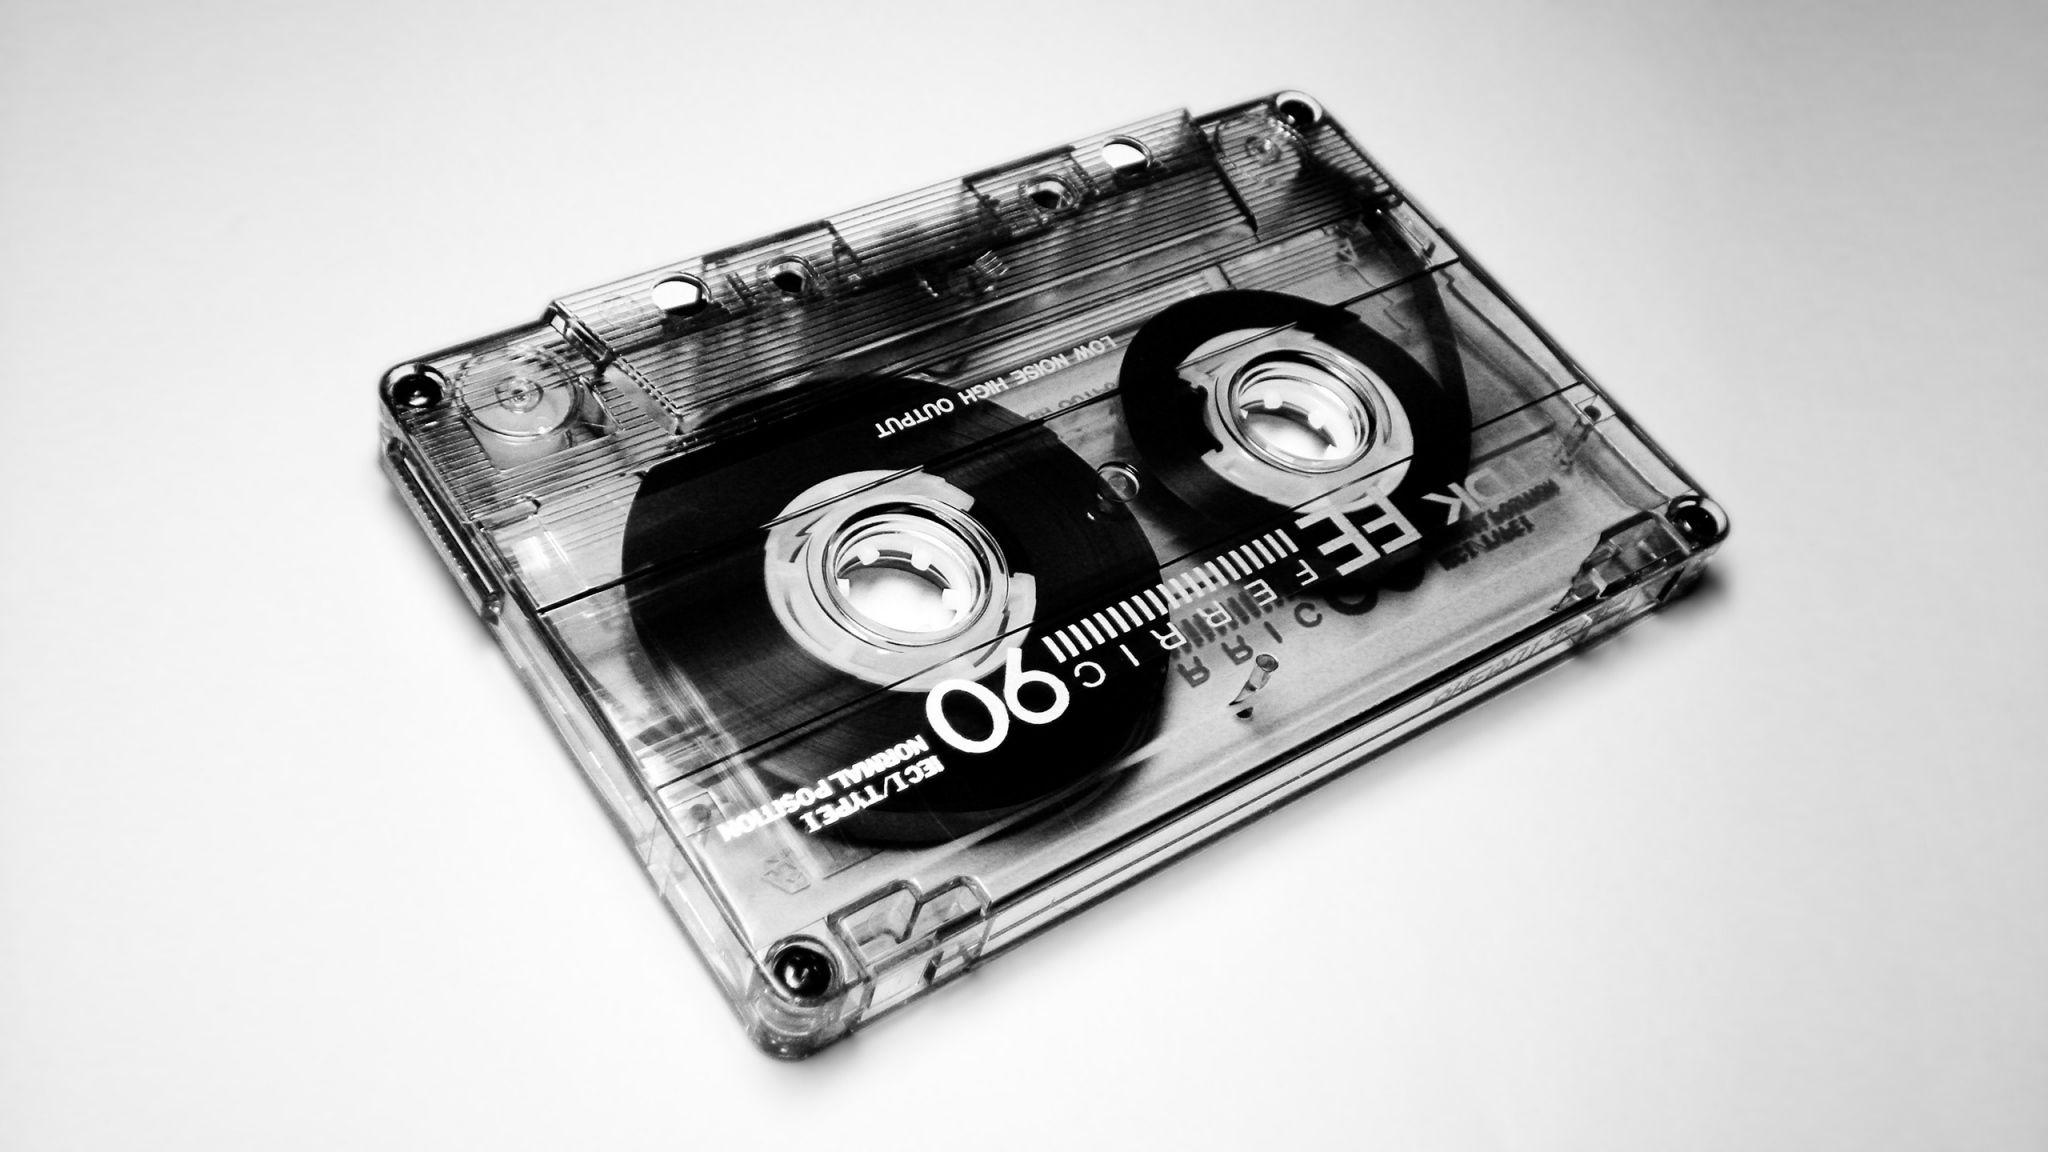 typographicwork EF90  Compact Cassette  SONY  Graphics thisisgrey  likes  Compact cassette Retro pictures Cassette